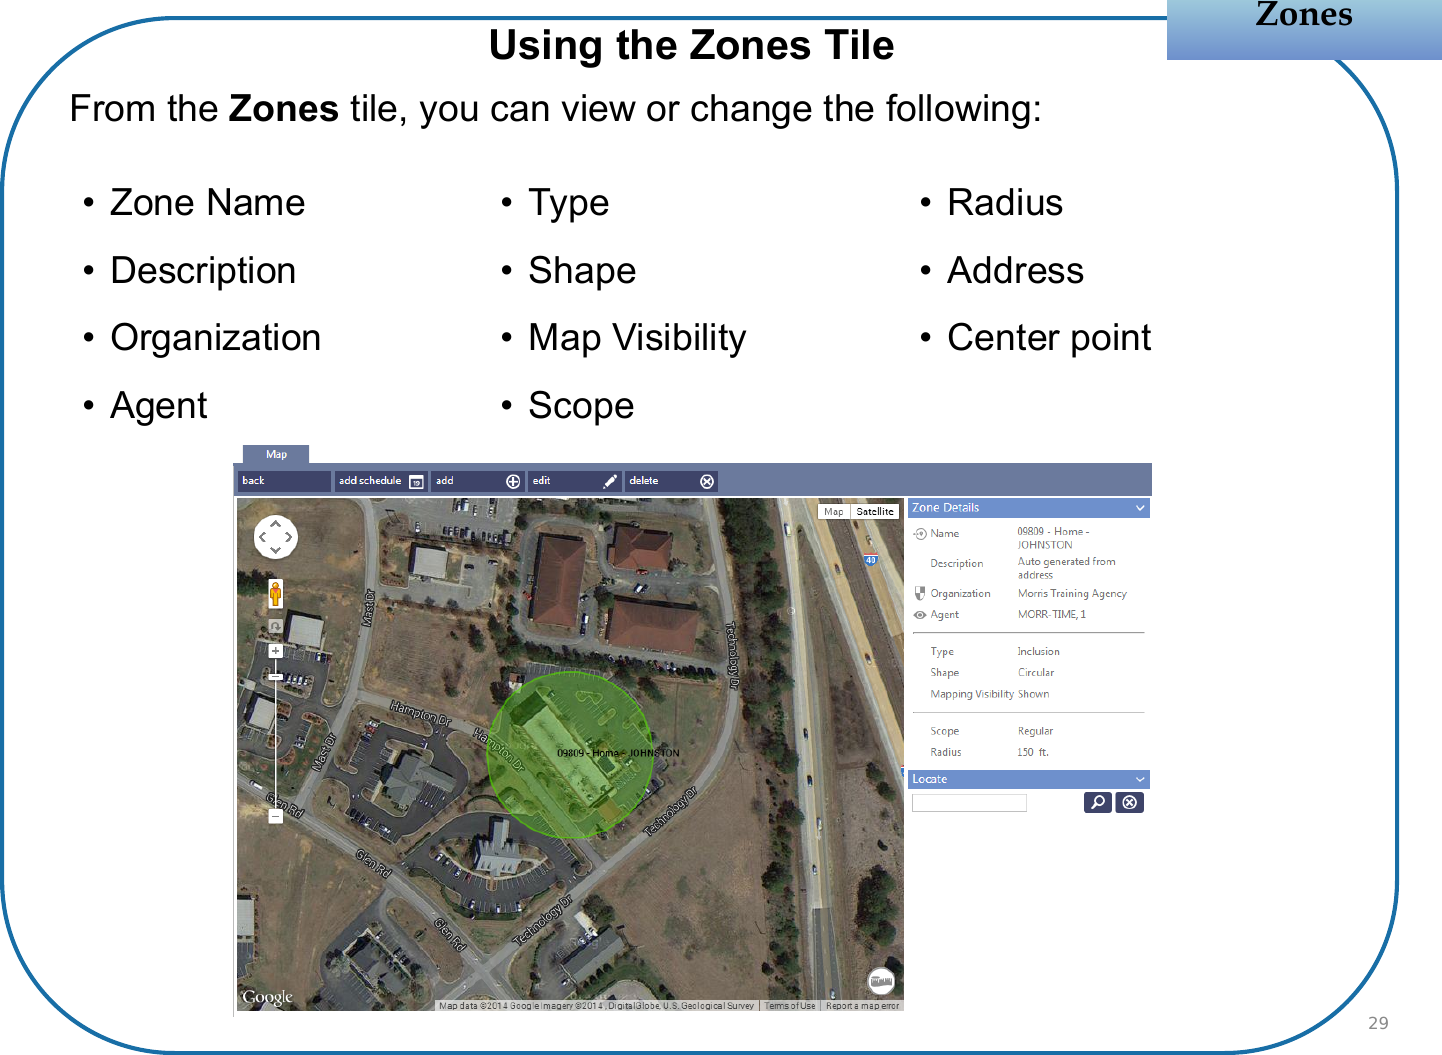 From the Zones tile, you can view or change the following:ZonesZonesUsing the Zones Tile• Zone Name• Description• Organization• Agent• Type• Shape• Map Visibility• Scope• Radius• Address• Center point29